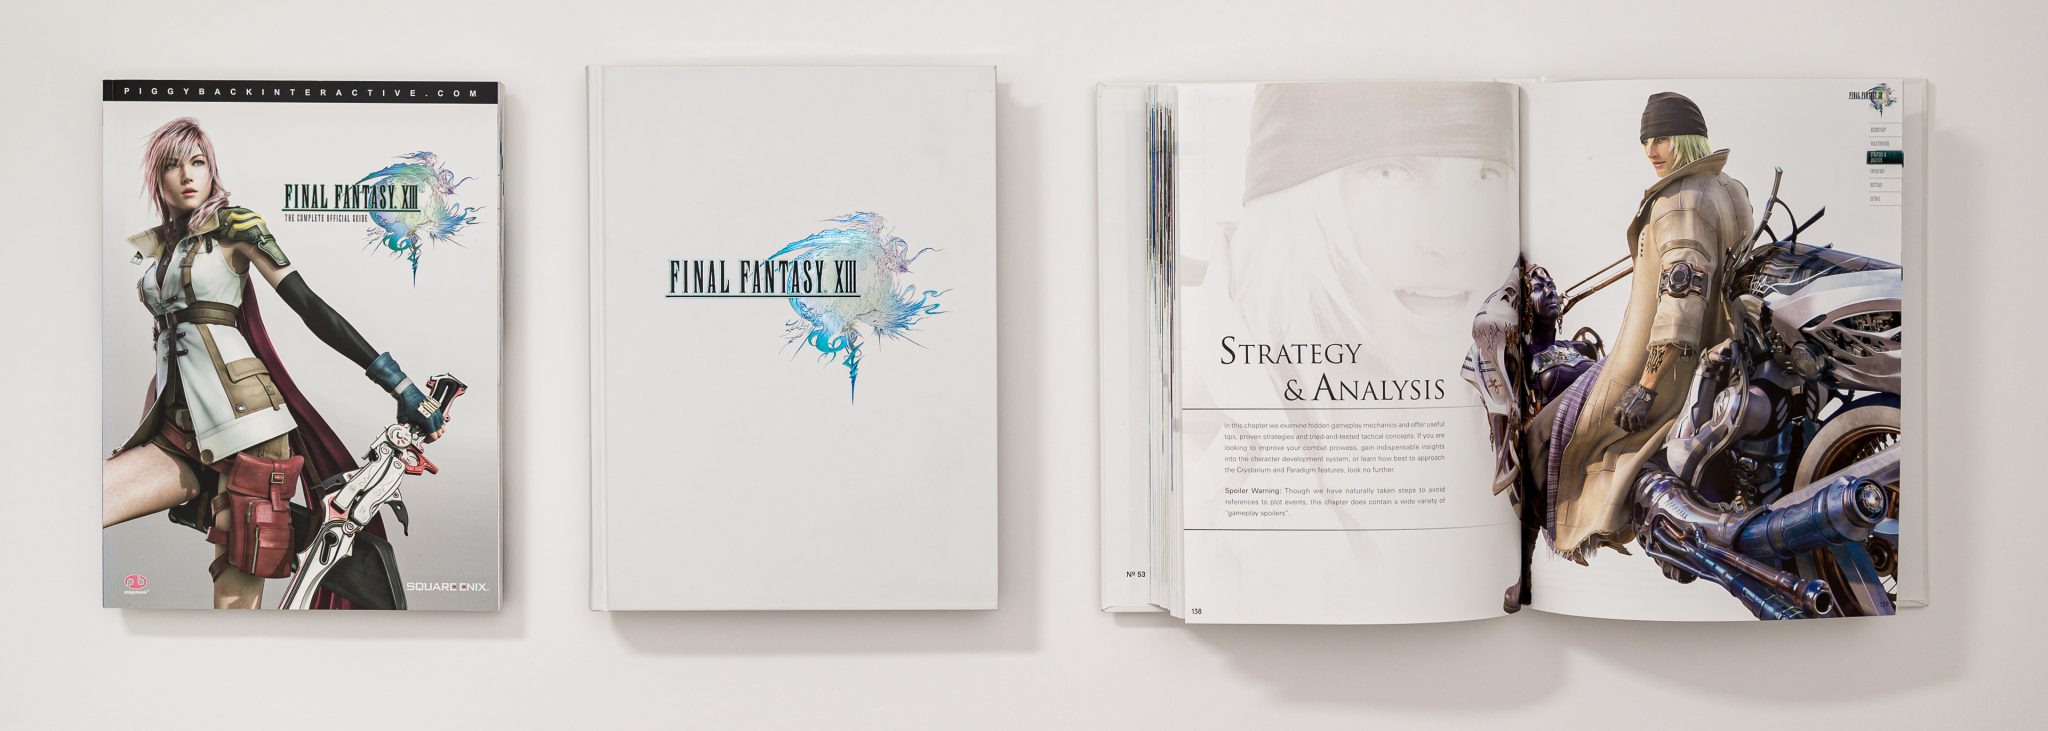 Final Fantasy Xiii The Complete Official Guide Piggyback